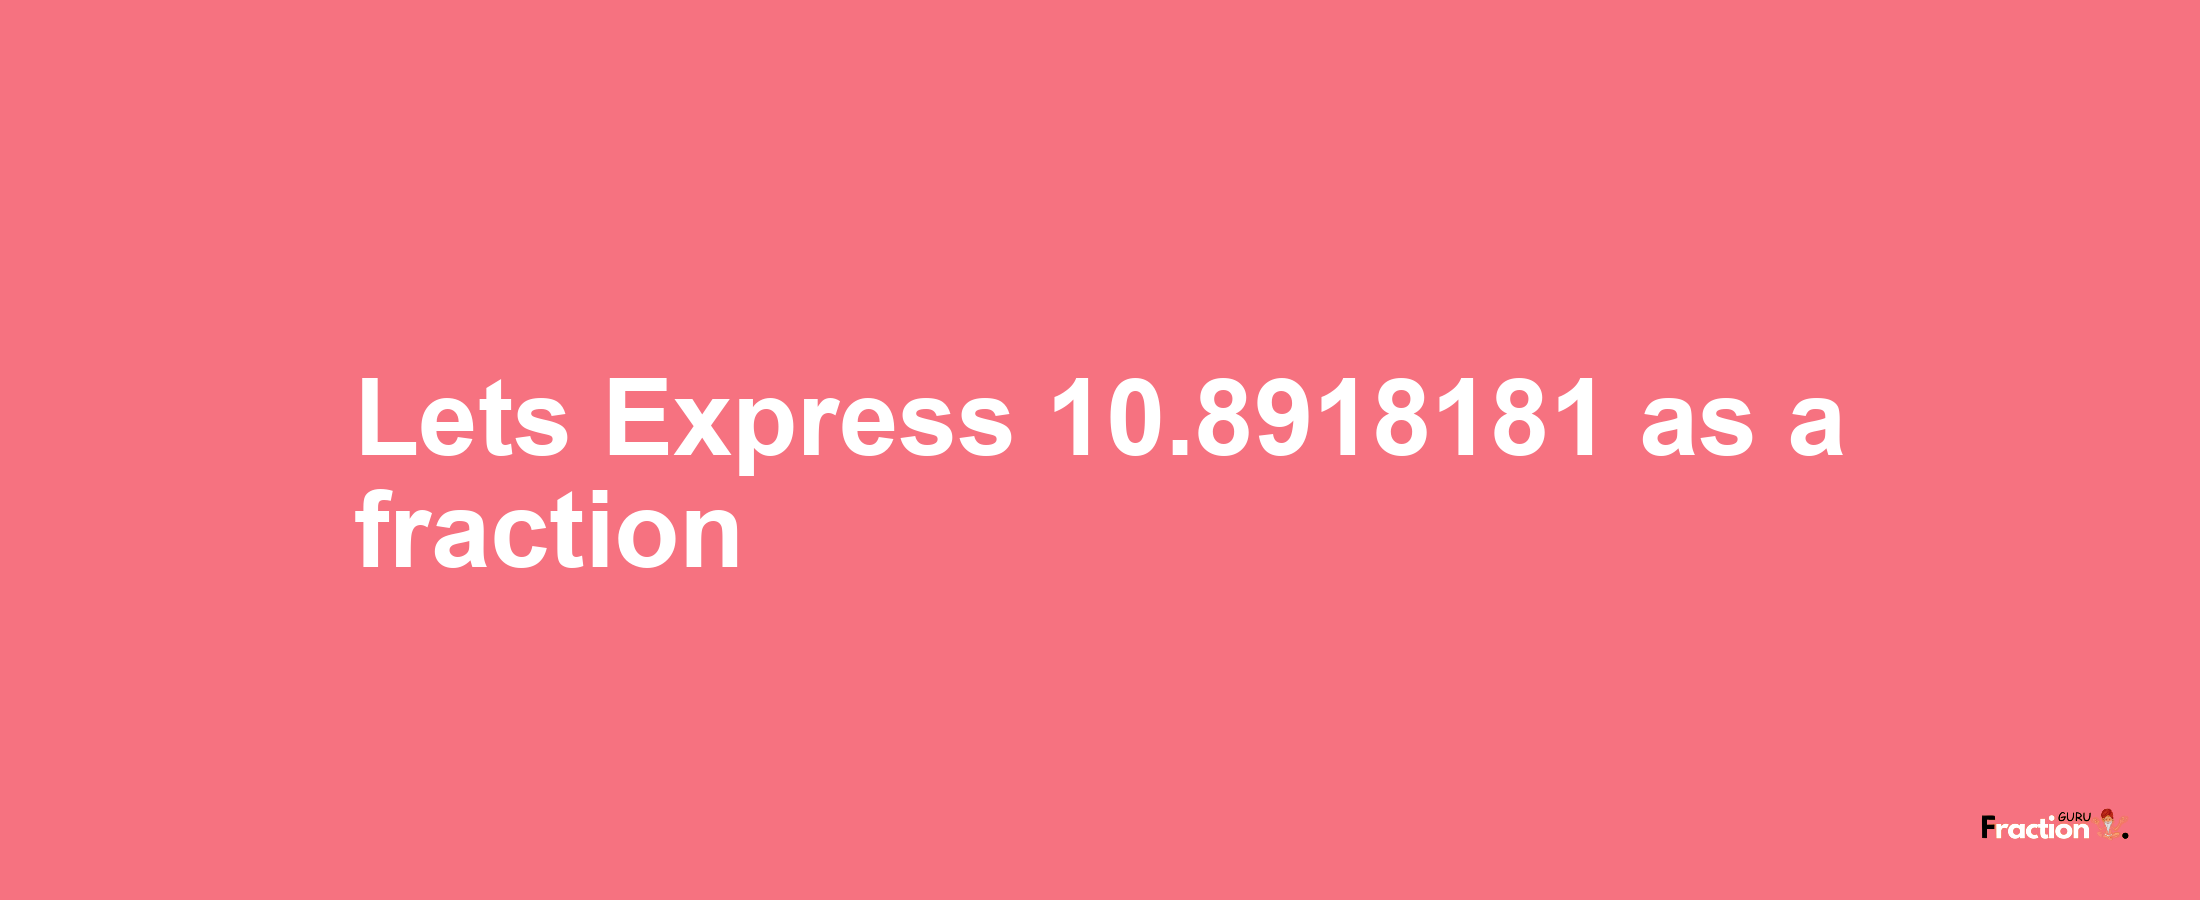 Lets Express 10.8918181 as afraction